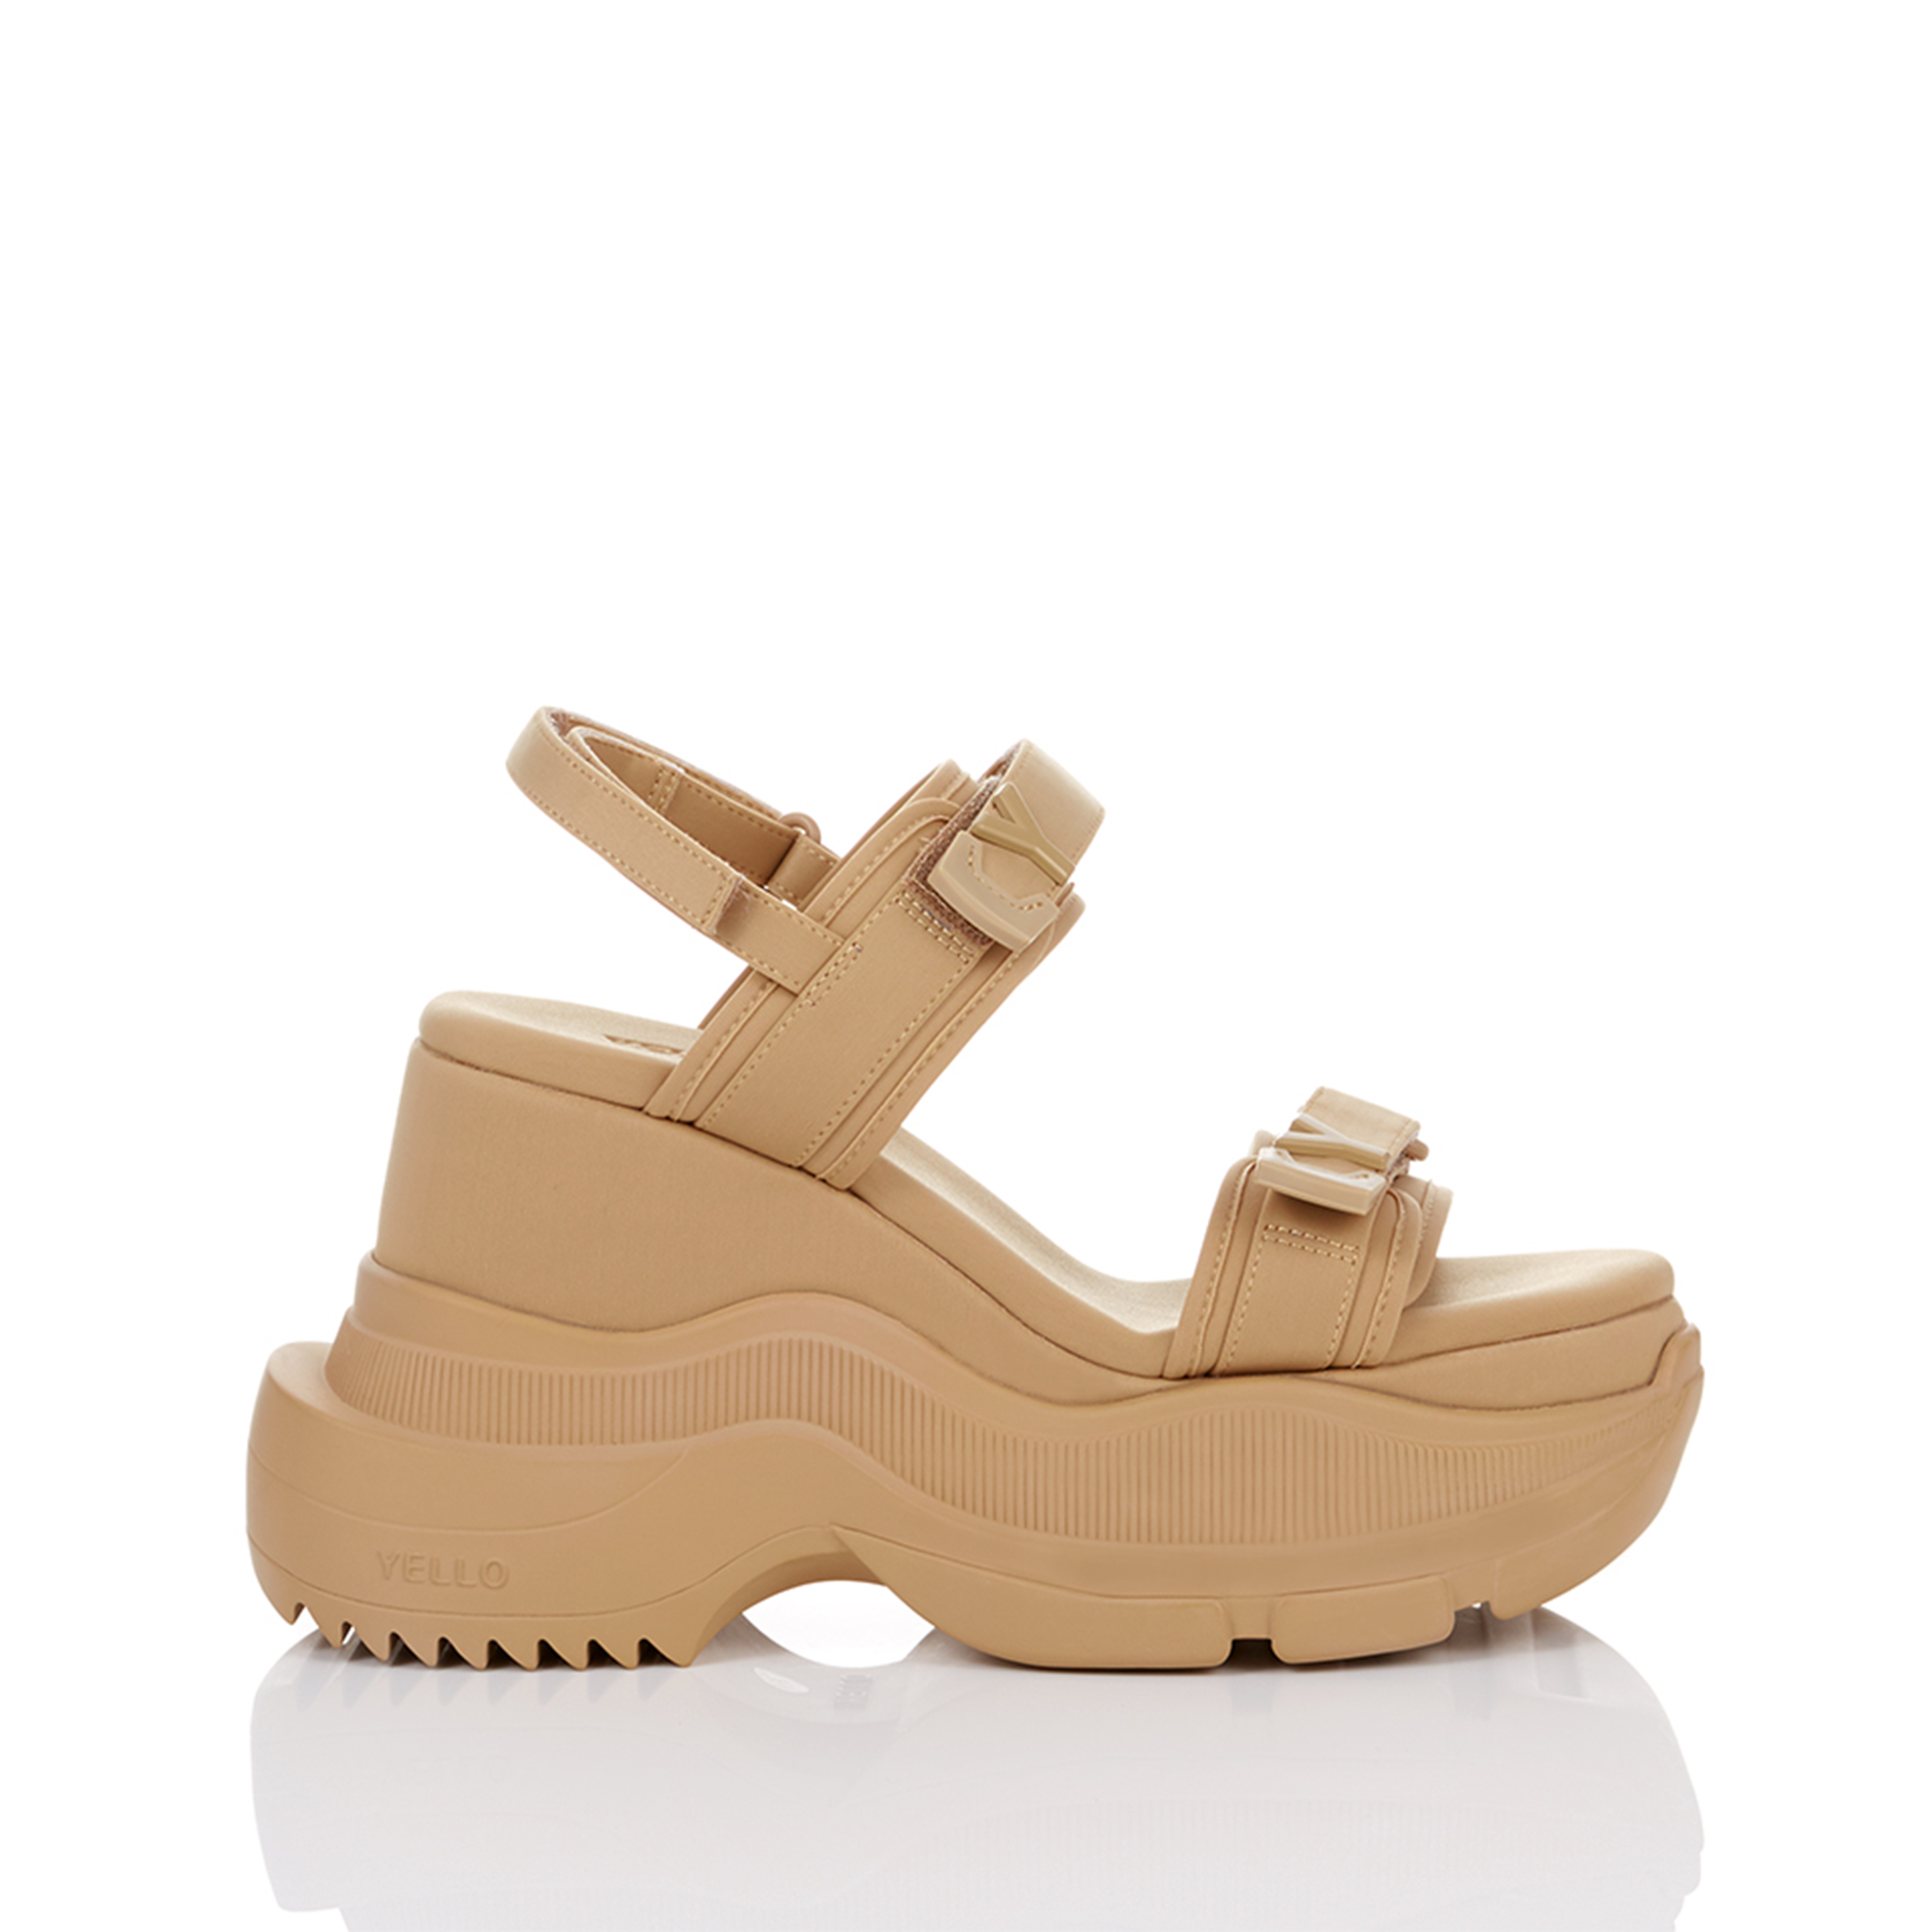 NAKED DOUBLE SNEAKER SANDALS